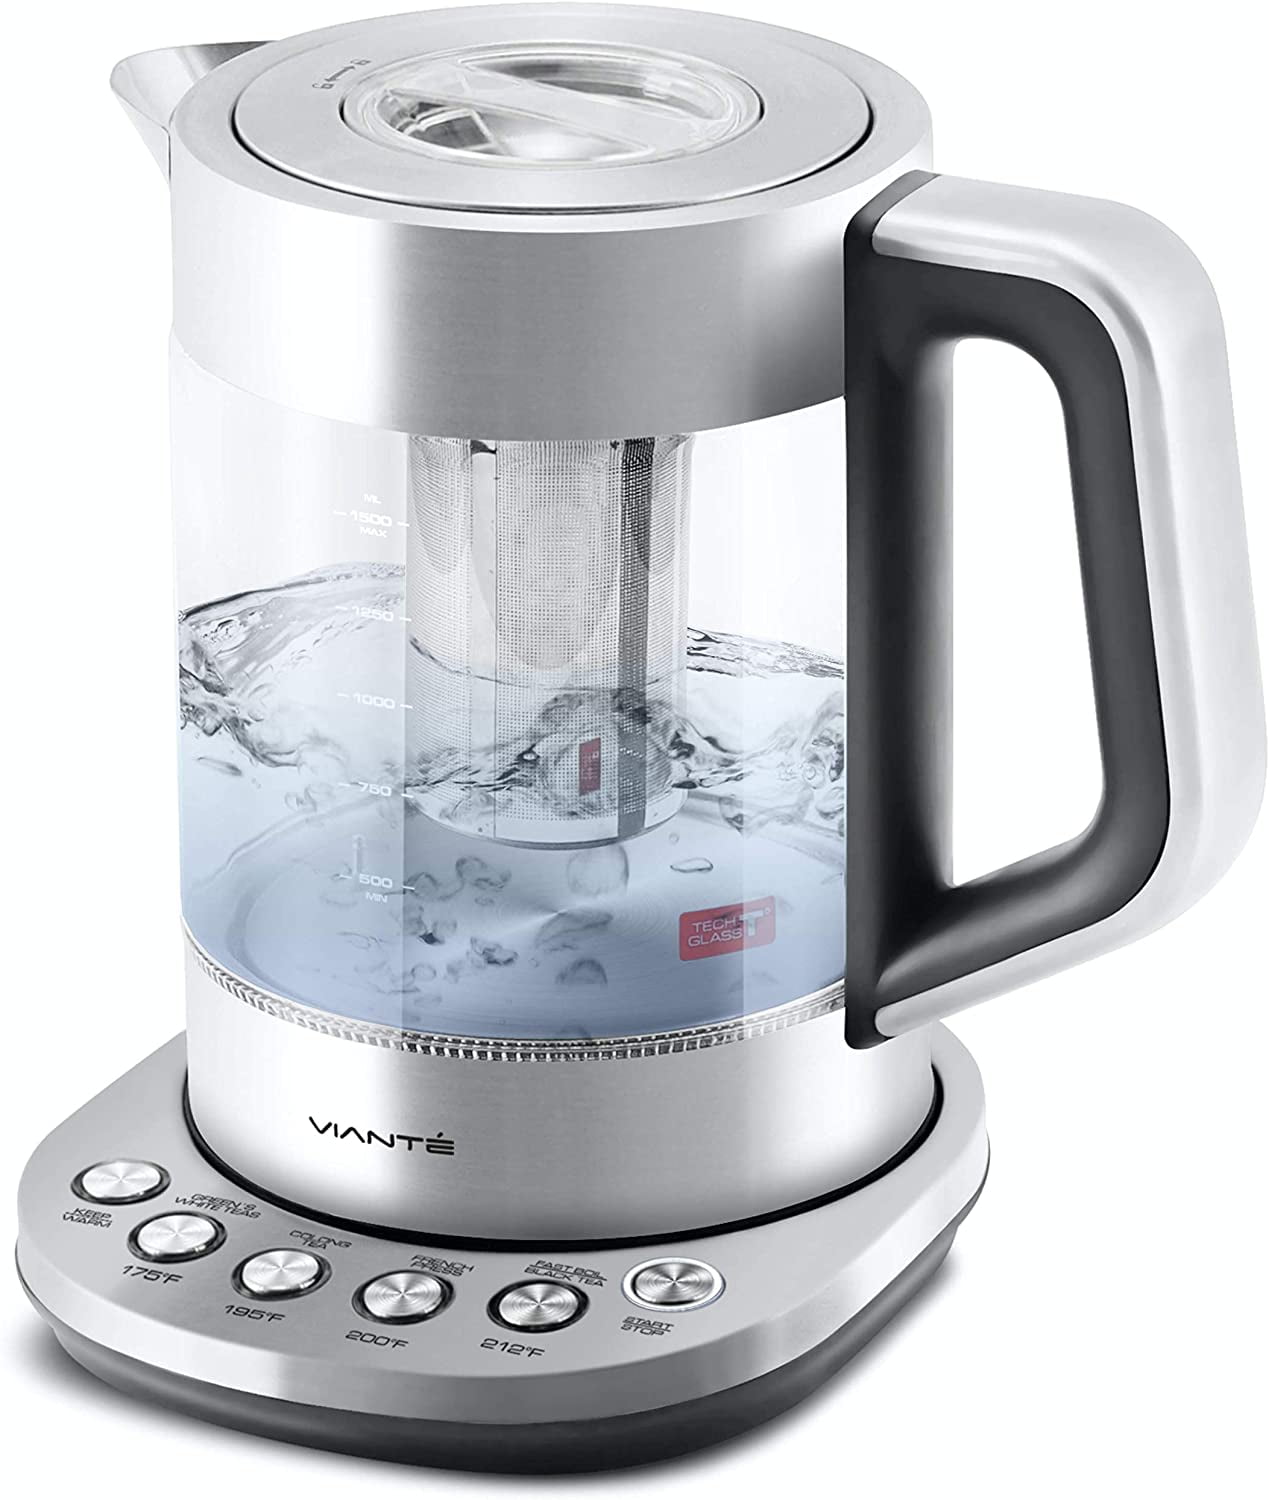 Get BANU Hot Tea Maker Electric Glass Kettle with Tea infuser and